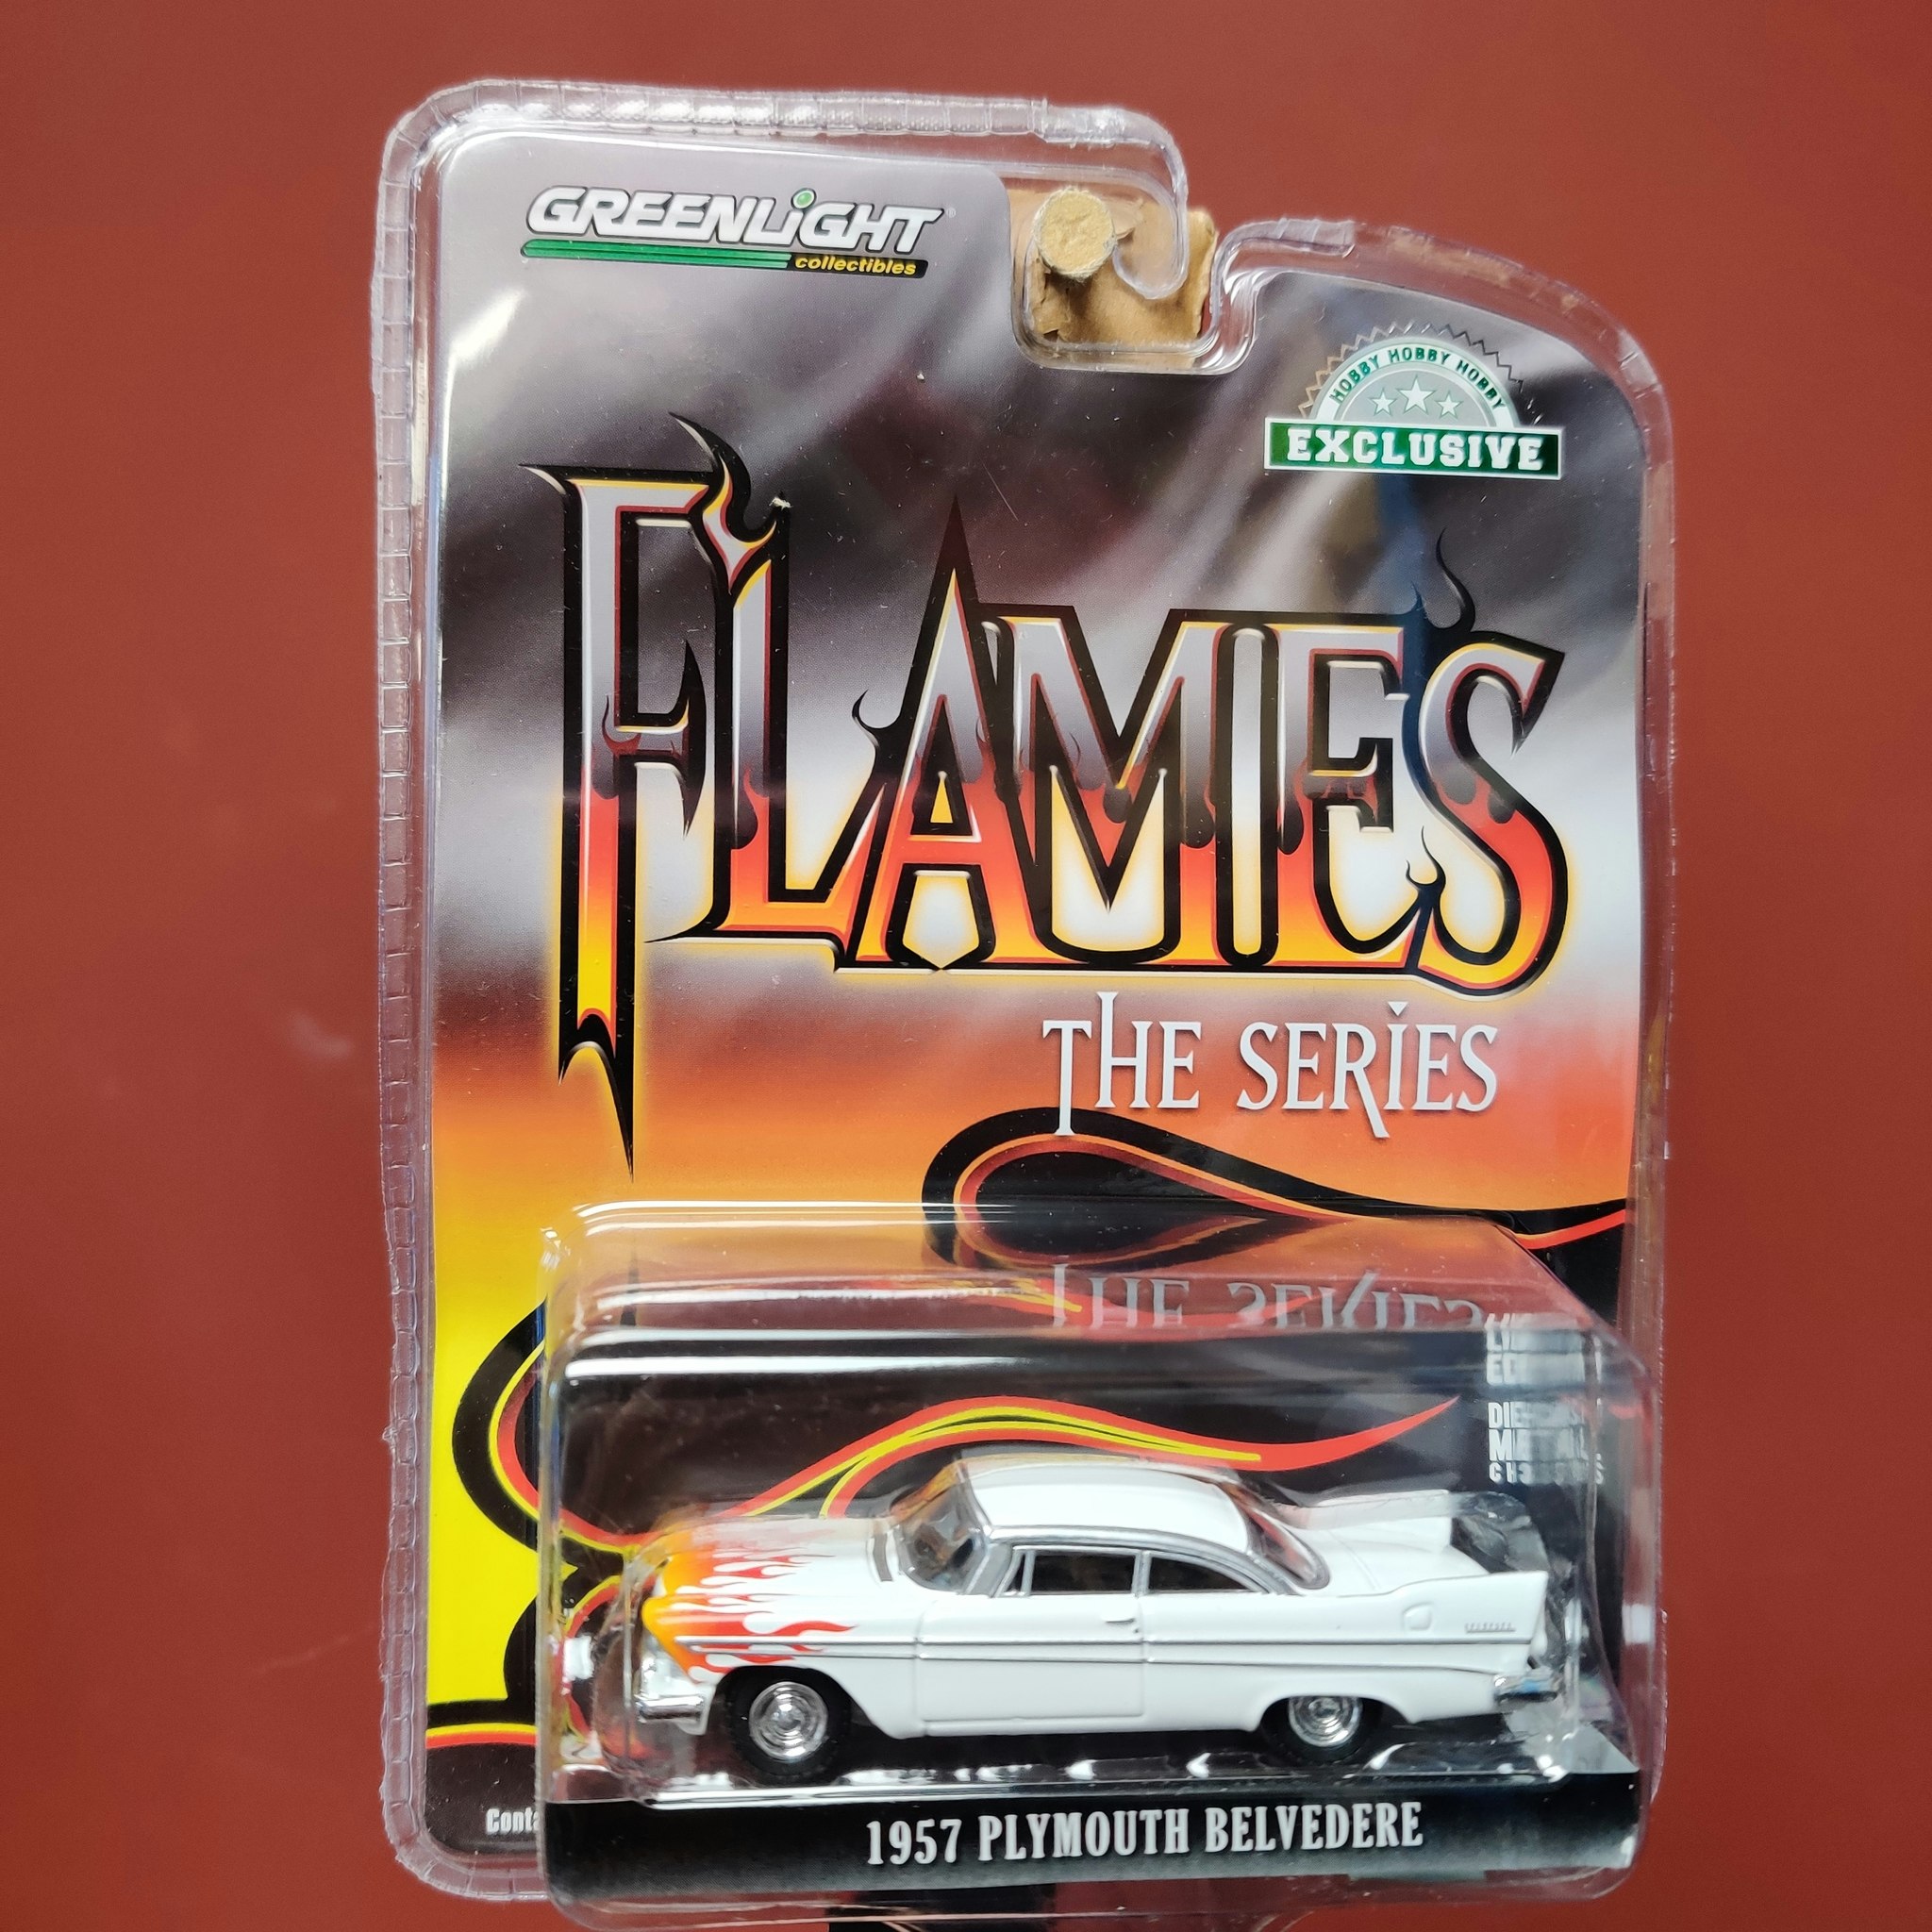 Skala 1/64 Plymouth Belvedere 57' "Flames The Series" från Greenlight Excl.